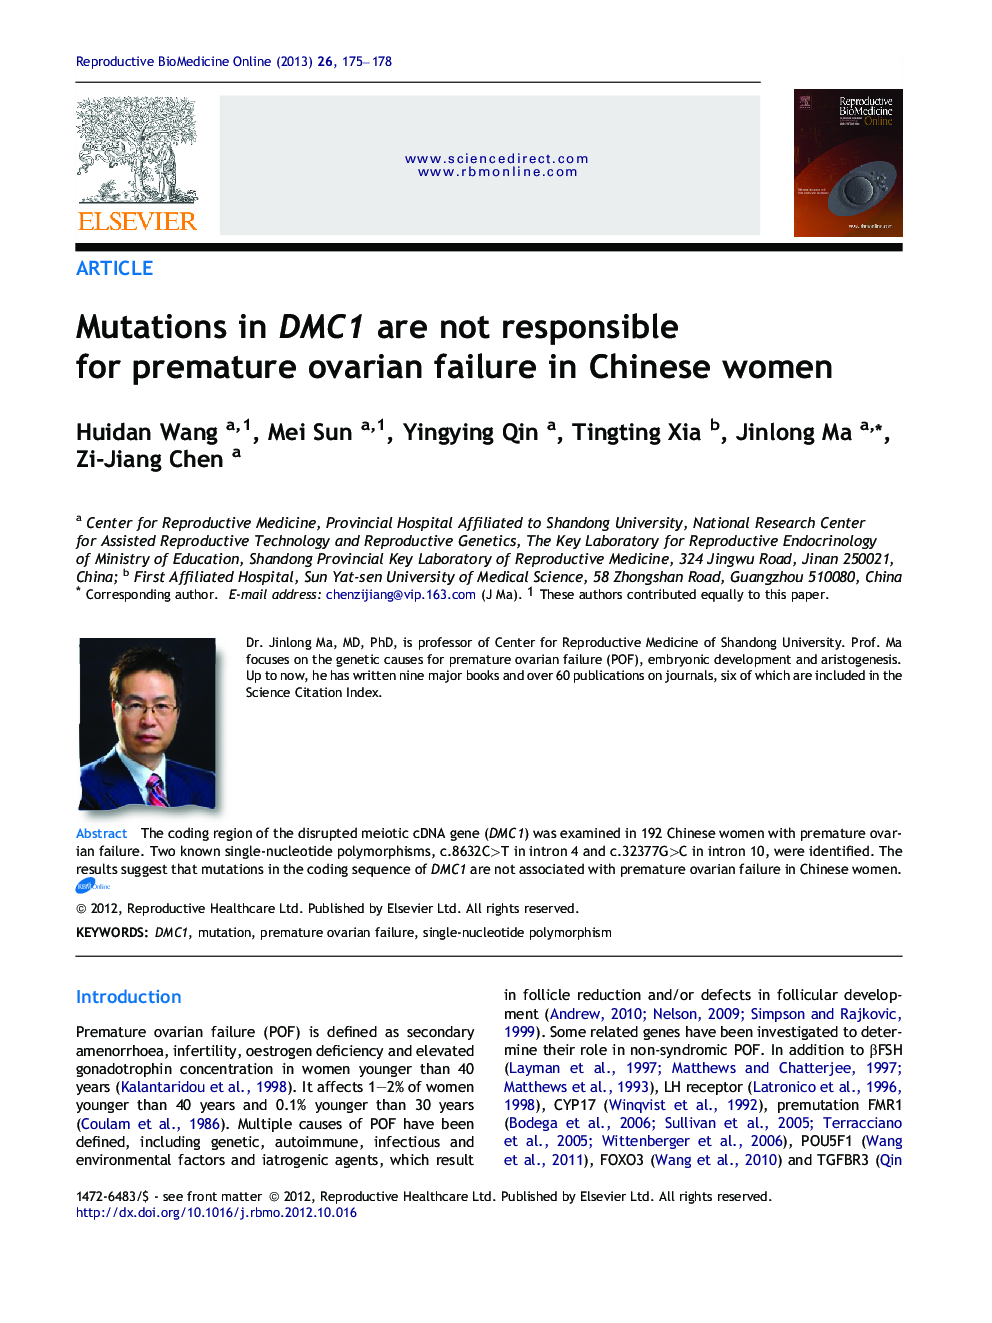 Mutations in DMC1 are not responsible for premature ovarian failure in Chinese women 